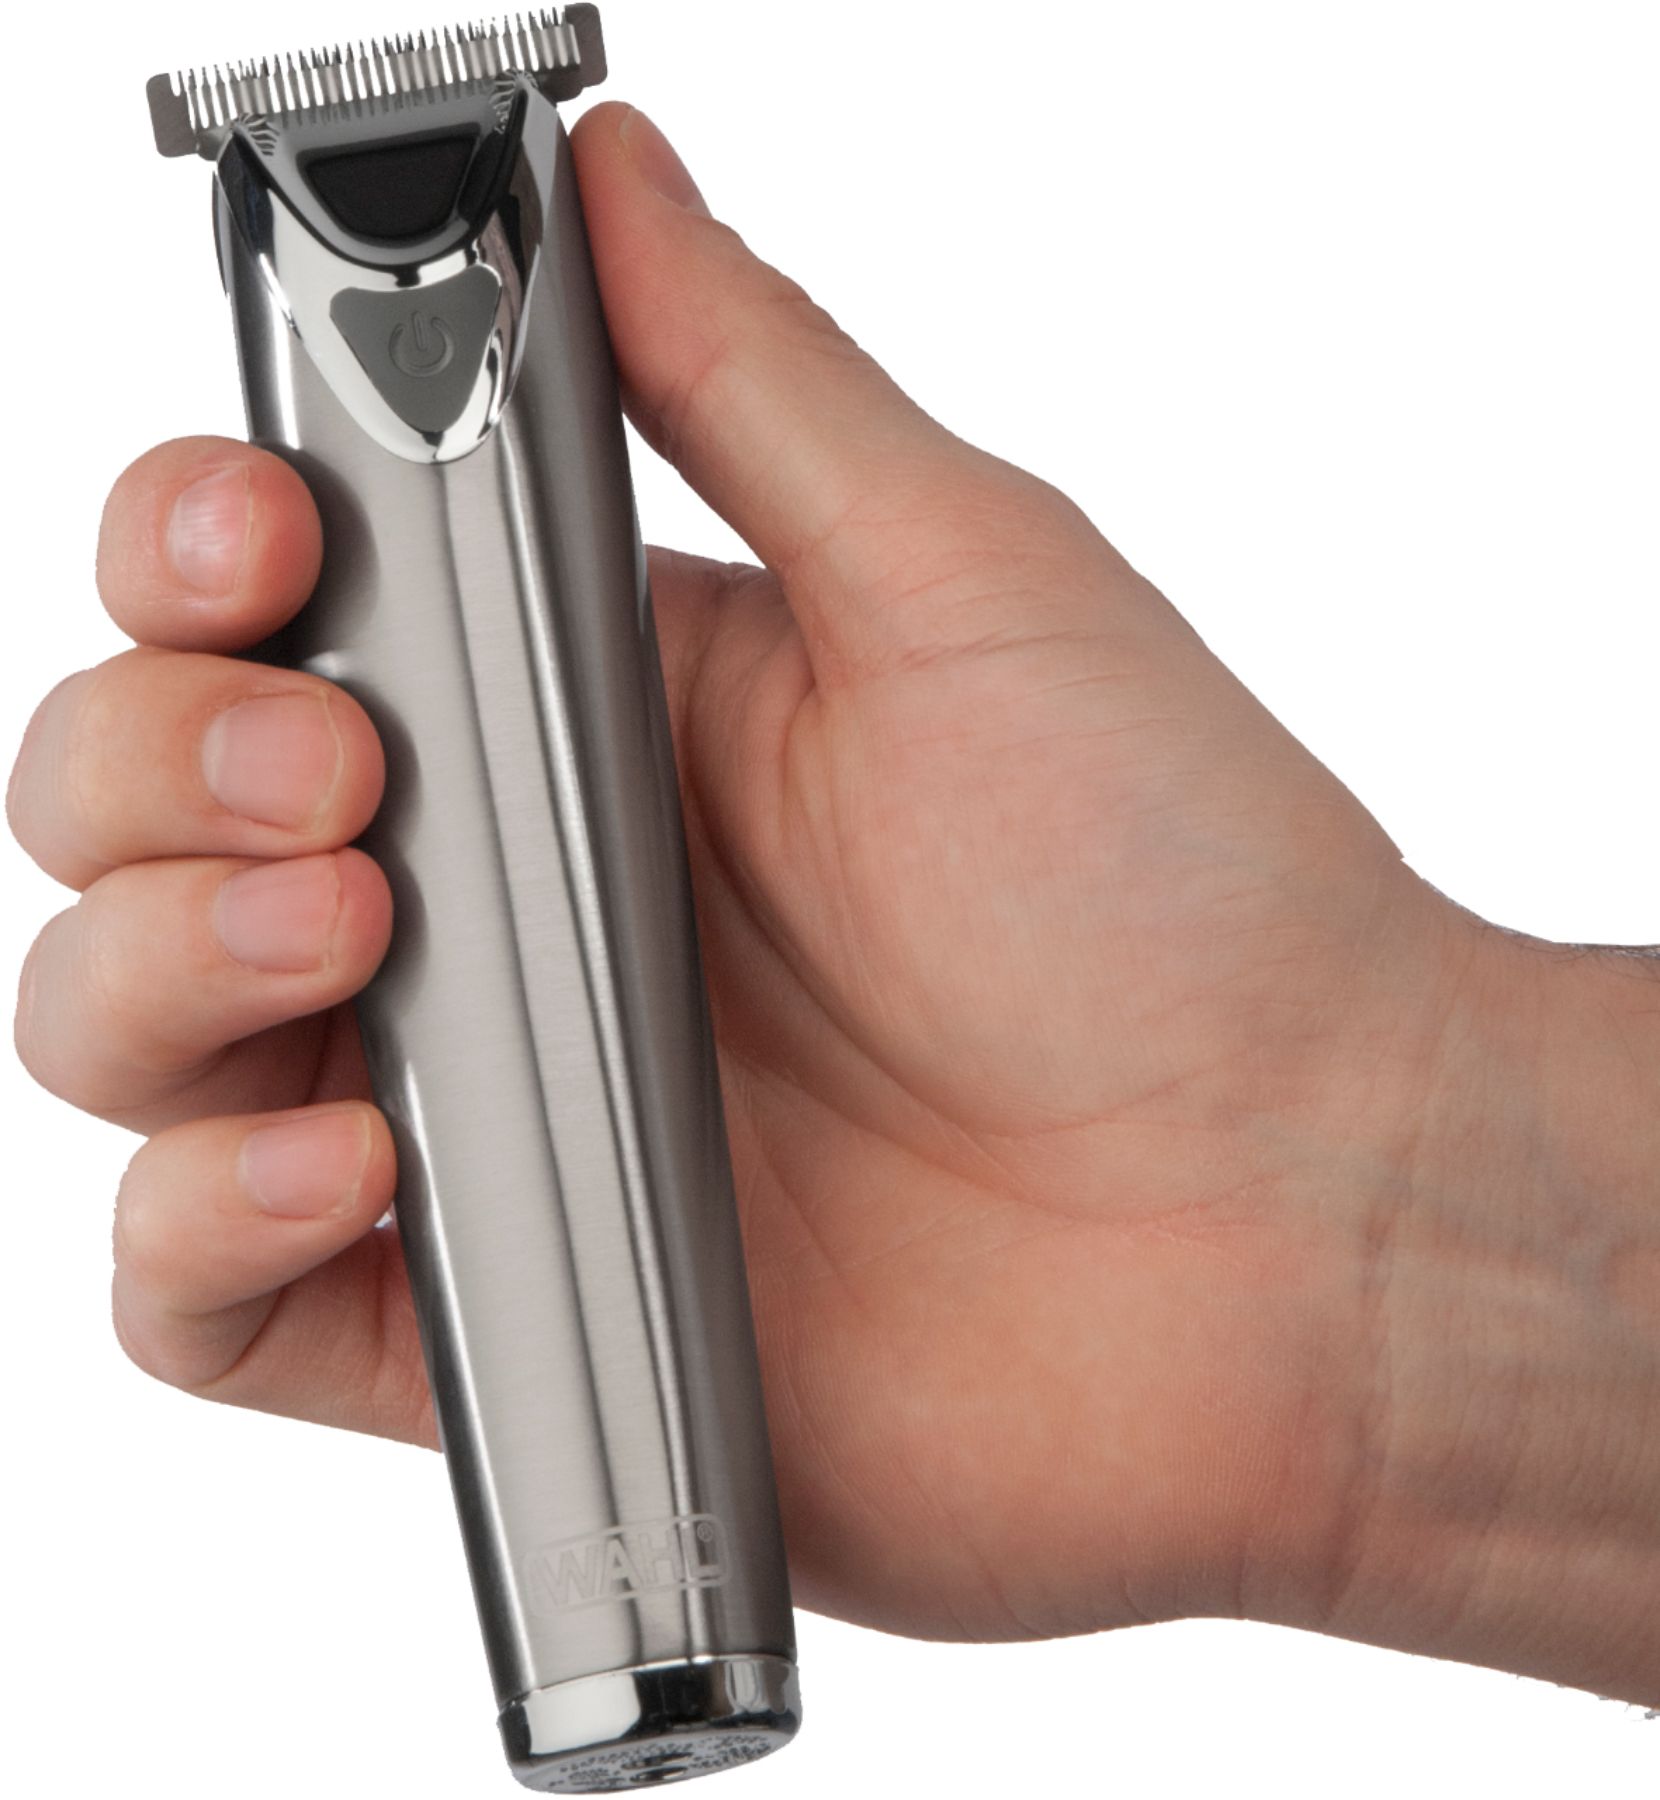 Wahl Lithium Ion All In One Trimmer Stainless Steel